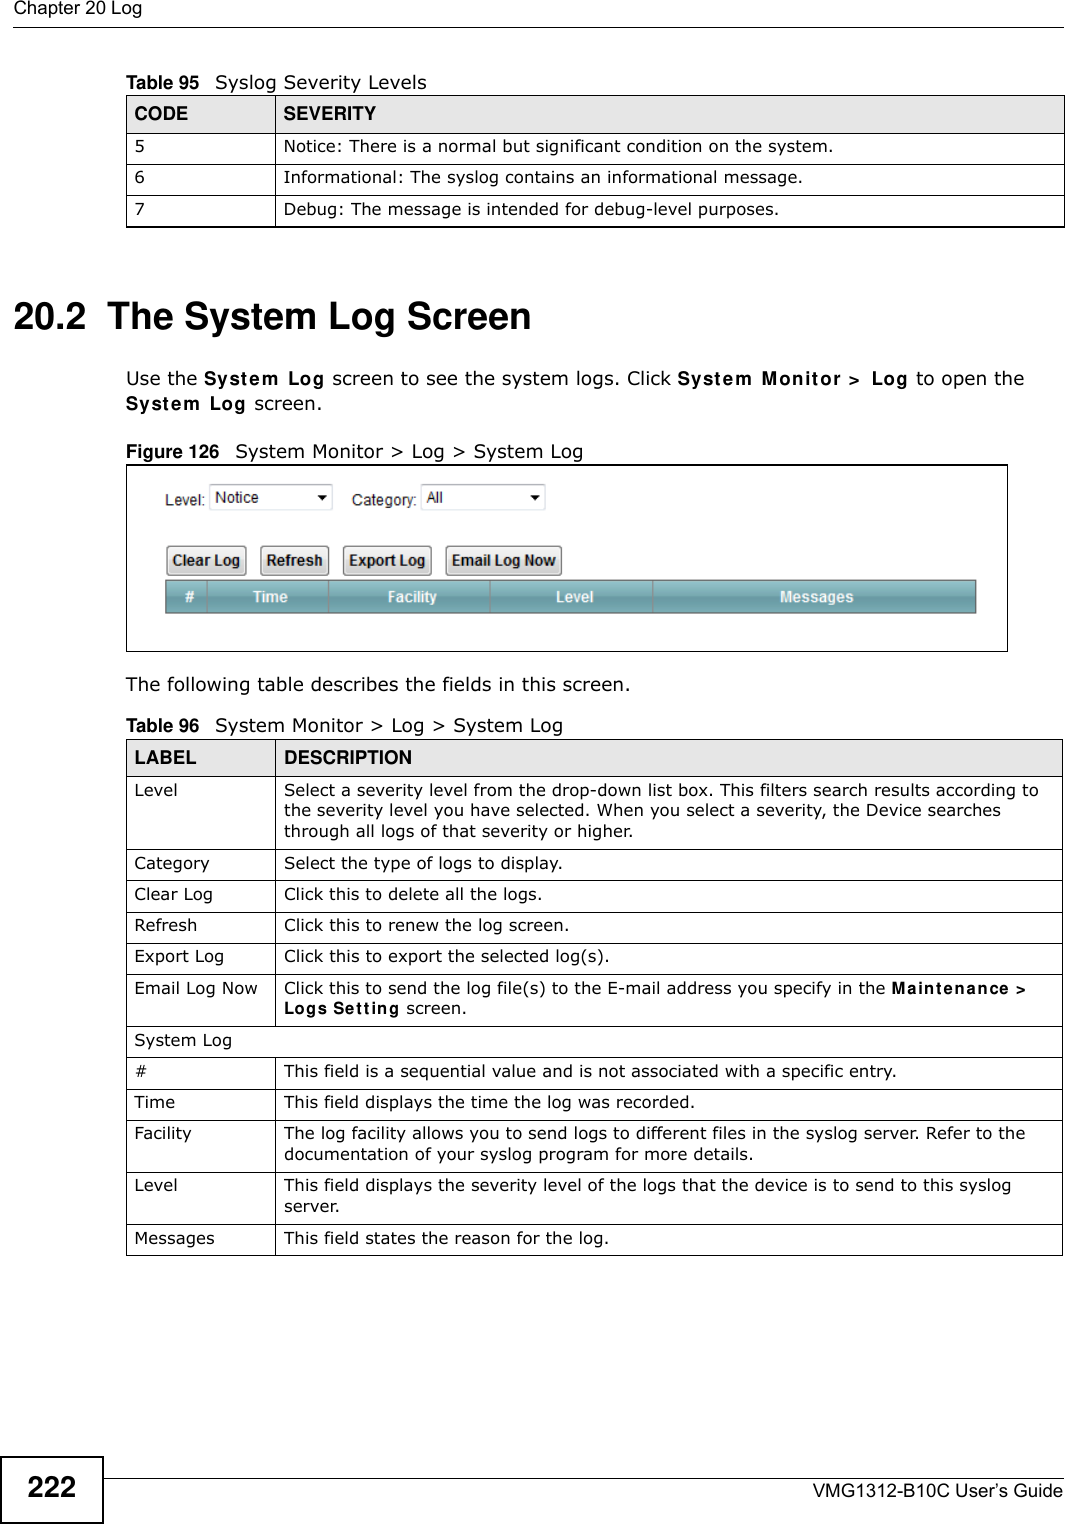 Chapter 20 LogVMG1312-B10C User’s Guide22220.2  The System Log Screen Use the Syst em  Log screen to see the system logs. Click Syst em  Mon it or  &gt;  Log to open the Syst e m  Log  screen. Figure 126   System Monitor &gt; Log &gt; System LogThe following table describes the fields in this screen.   5 Notice: There is a normal but significant condition on the system.6 Informational: The syslog contains an informational message.7 Debug: The message is intended for debug-level purposes.Table 95   Syslog Severity LevelsCODE SEVERITYTable 96   System Monitor &gt; Log &gt; System LogLABEL DESCRIPTIONLevel Select a severity level from the drop-down list box. This filters search results according to the severity level you have selected. When you select a severity, the Device searches through all logs of that severity or higher. Category Select the type of logs to display.Clear Log  Click this to delete all the logs. Refresh Click this to renew the log screen. Export Log Click this to export the selected log(s).Email Log Now Click this to send the log file(s) to the E-mail address you specify in the M a in t e na n ce &gt;  Logs Set t in g screen.System Log#This field is a sequential value and is not associated with a specific entry.Time  This field displays the time the log was recorded. Facility  The log facility allows you to send logs to different files in the syslog server. Refer to the documentation of your syslog program for more details.Level This field displays the severity level of the logs that the device is to send to this syslog server.Messages This field states the reason for the log.